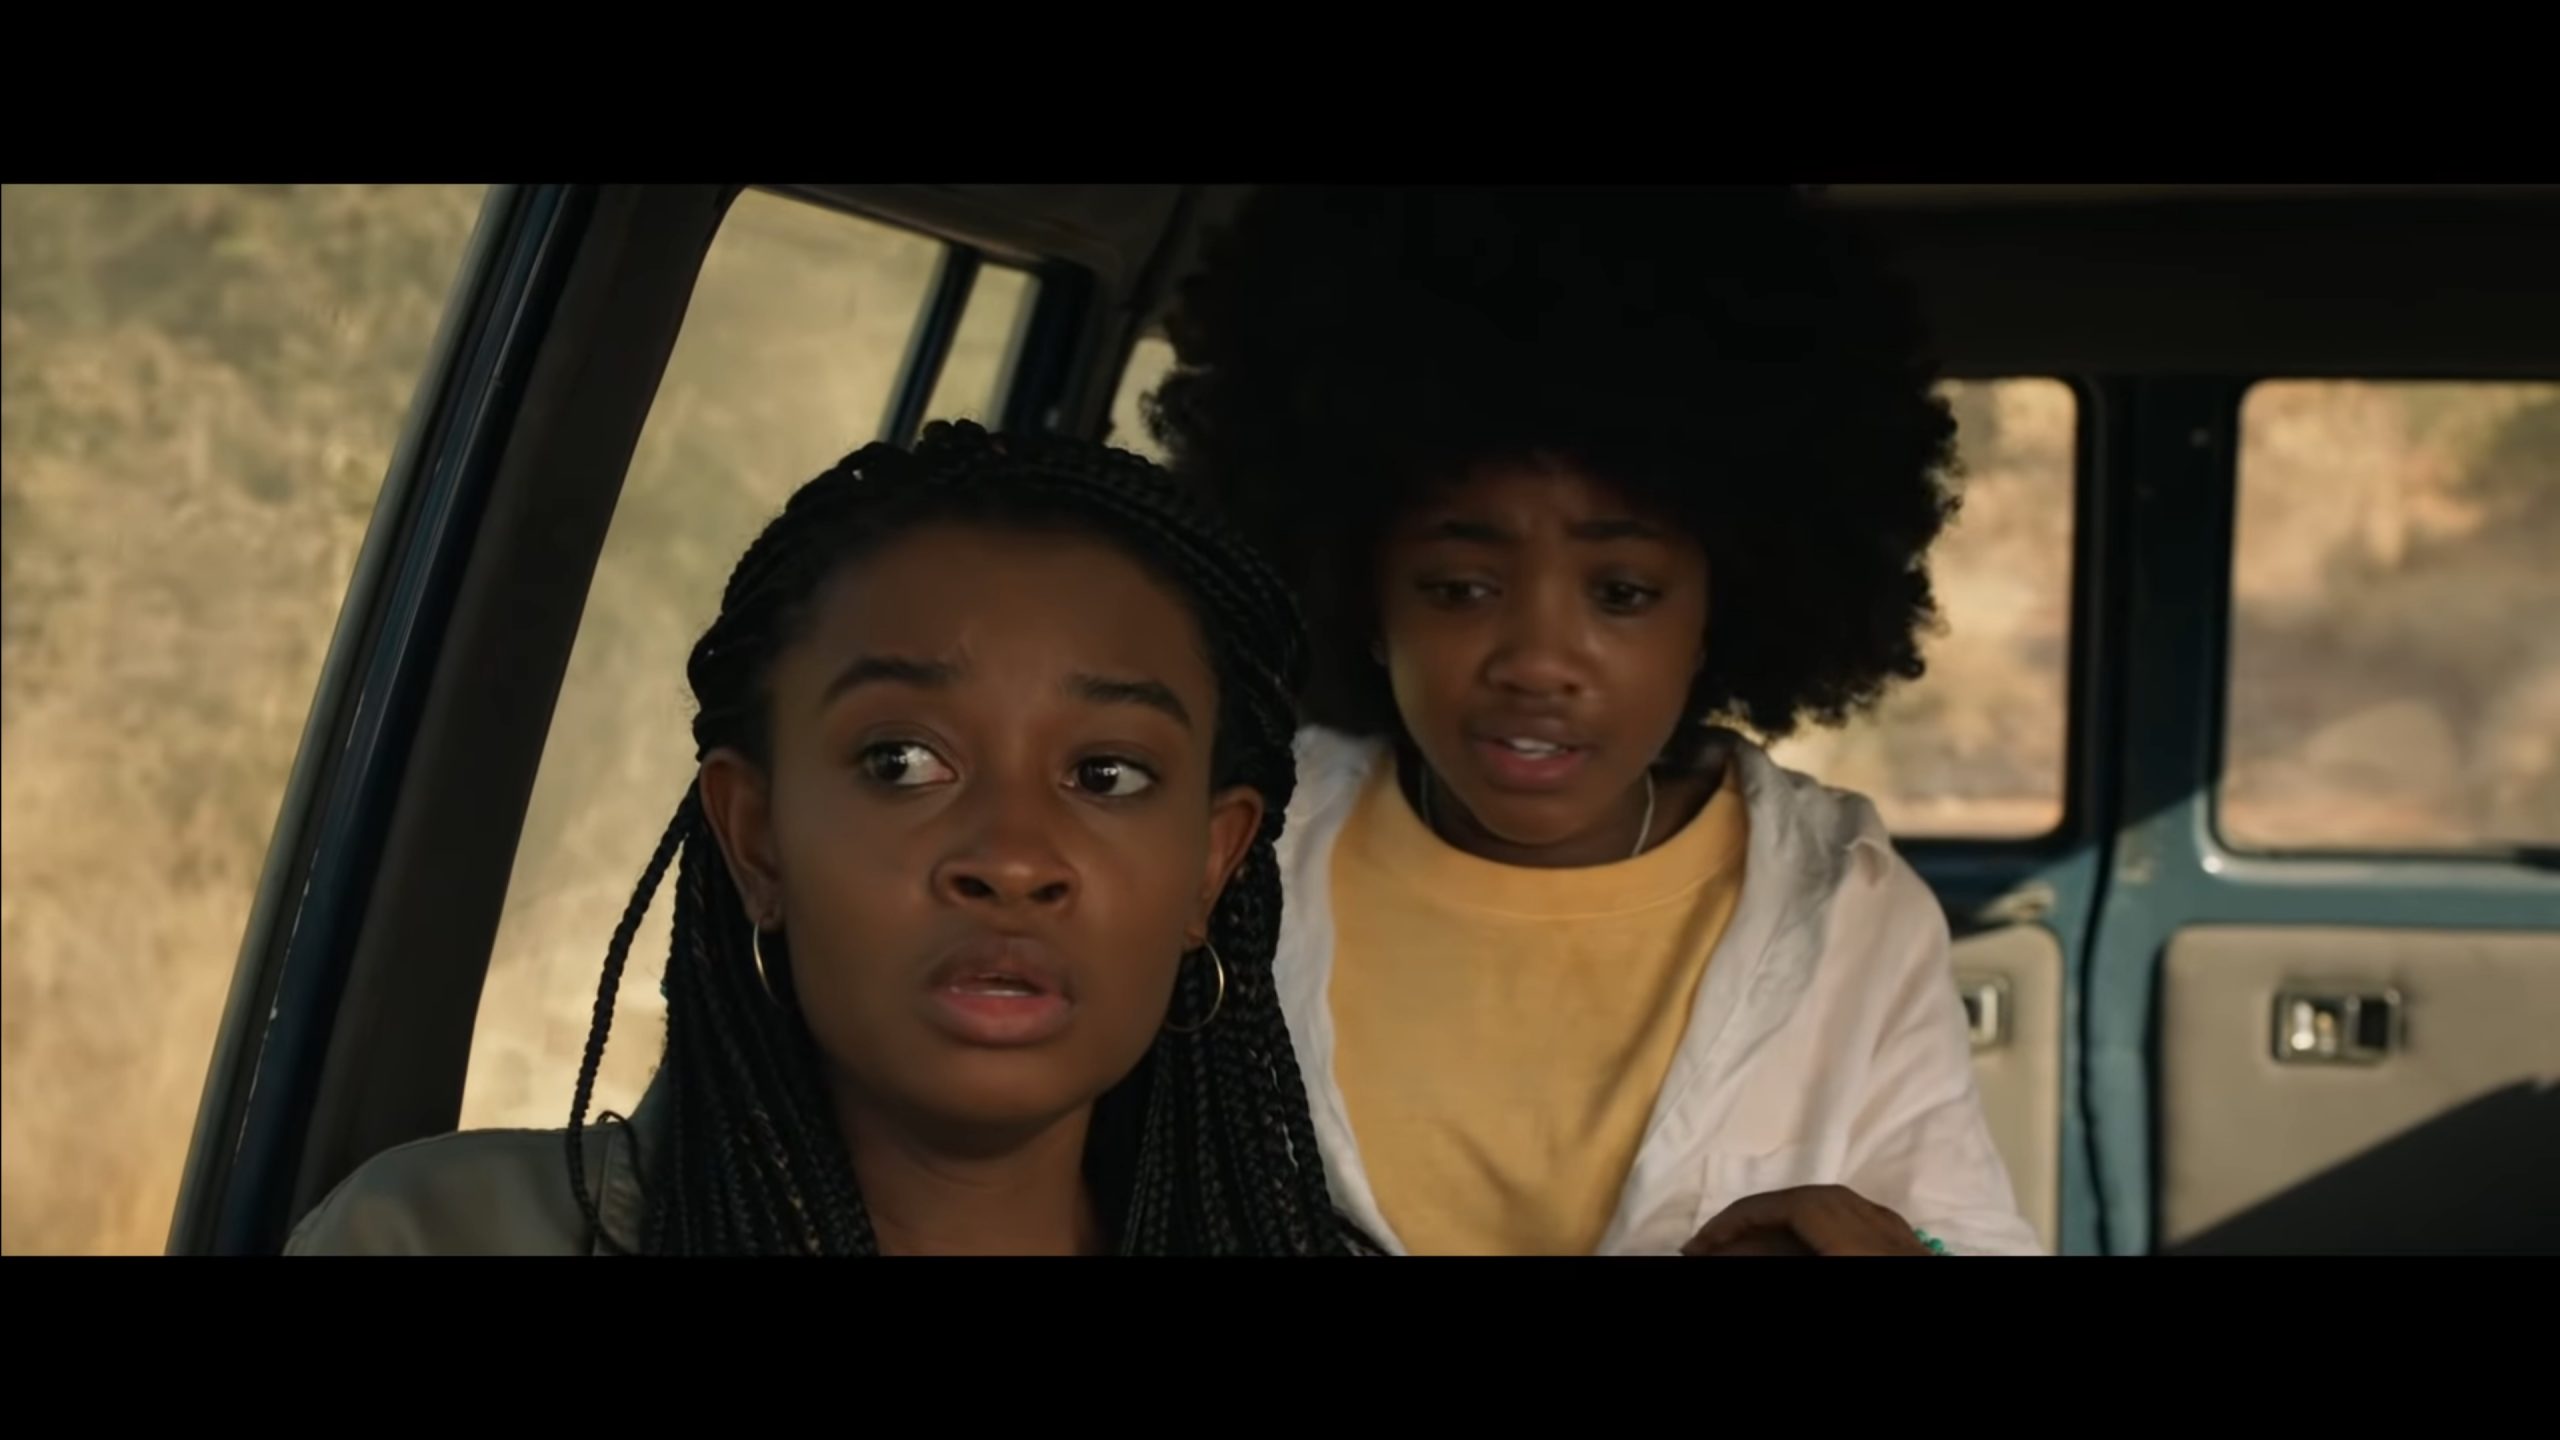 Meredith (Iyana Halley) and Norah (Leah Jeffries) worried while in Martin's vehicle